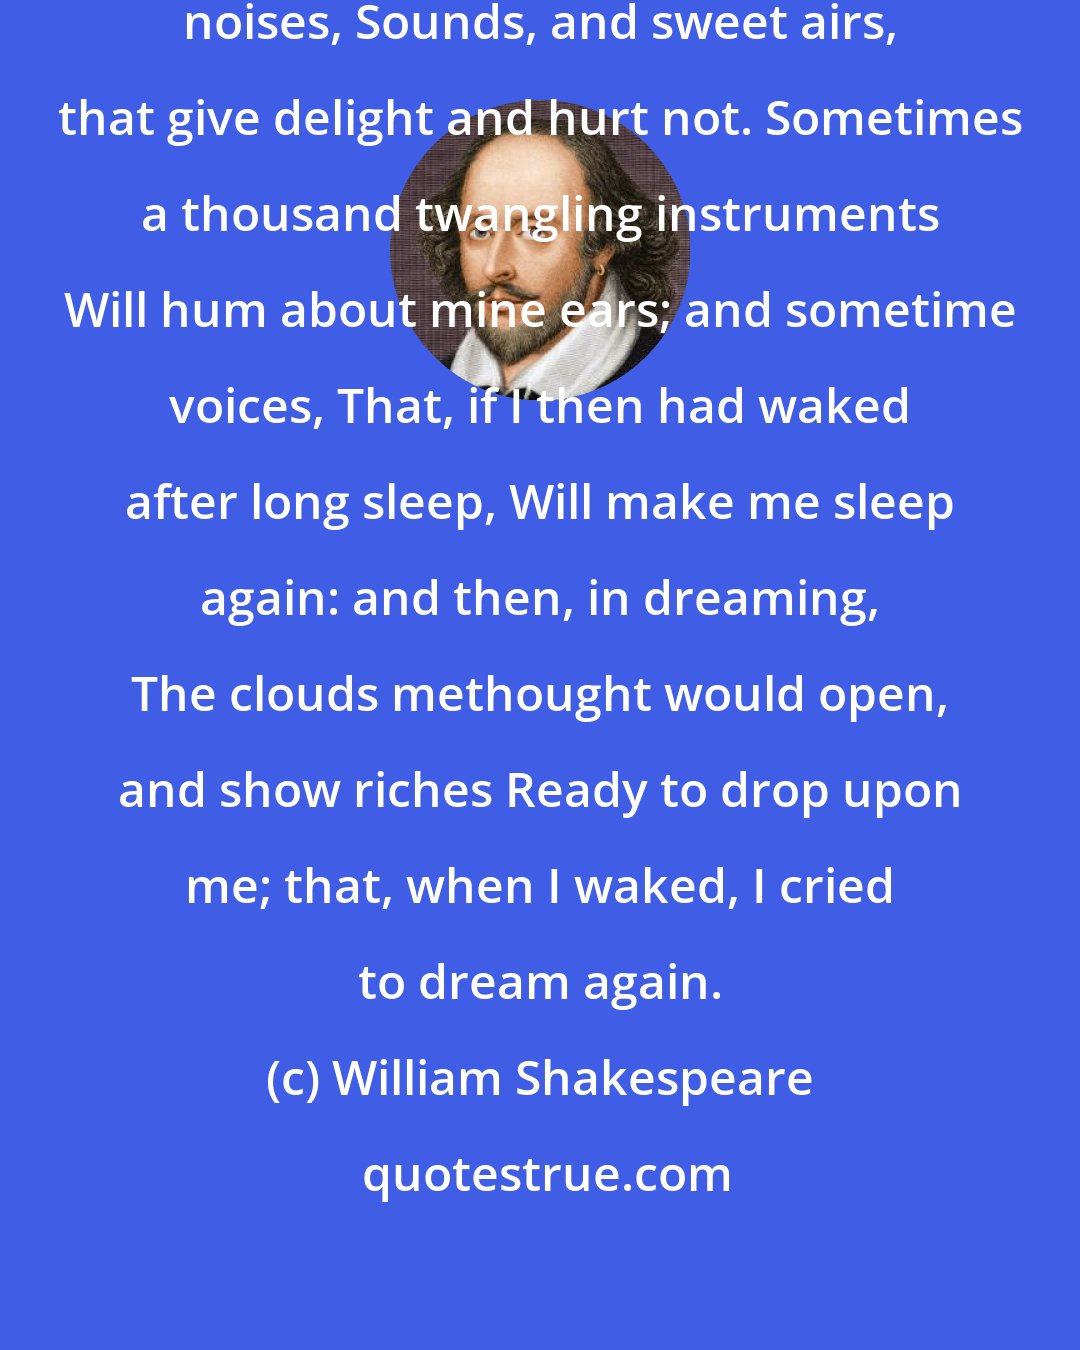 William Shakespeare: Be not afeard; the isle is full of noises, Sounds, and sweet airs, that give delight and hurt not. Sometimes a thousand twangling instruments Will hum about mine ears; and sometime voices, That, if I then had waked after long sleep, Will make me sleep again: and then, in dreaming, The clouds methought would open, and show riches Ready to drop upon me; that, when I waked, I cried to dream again.